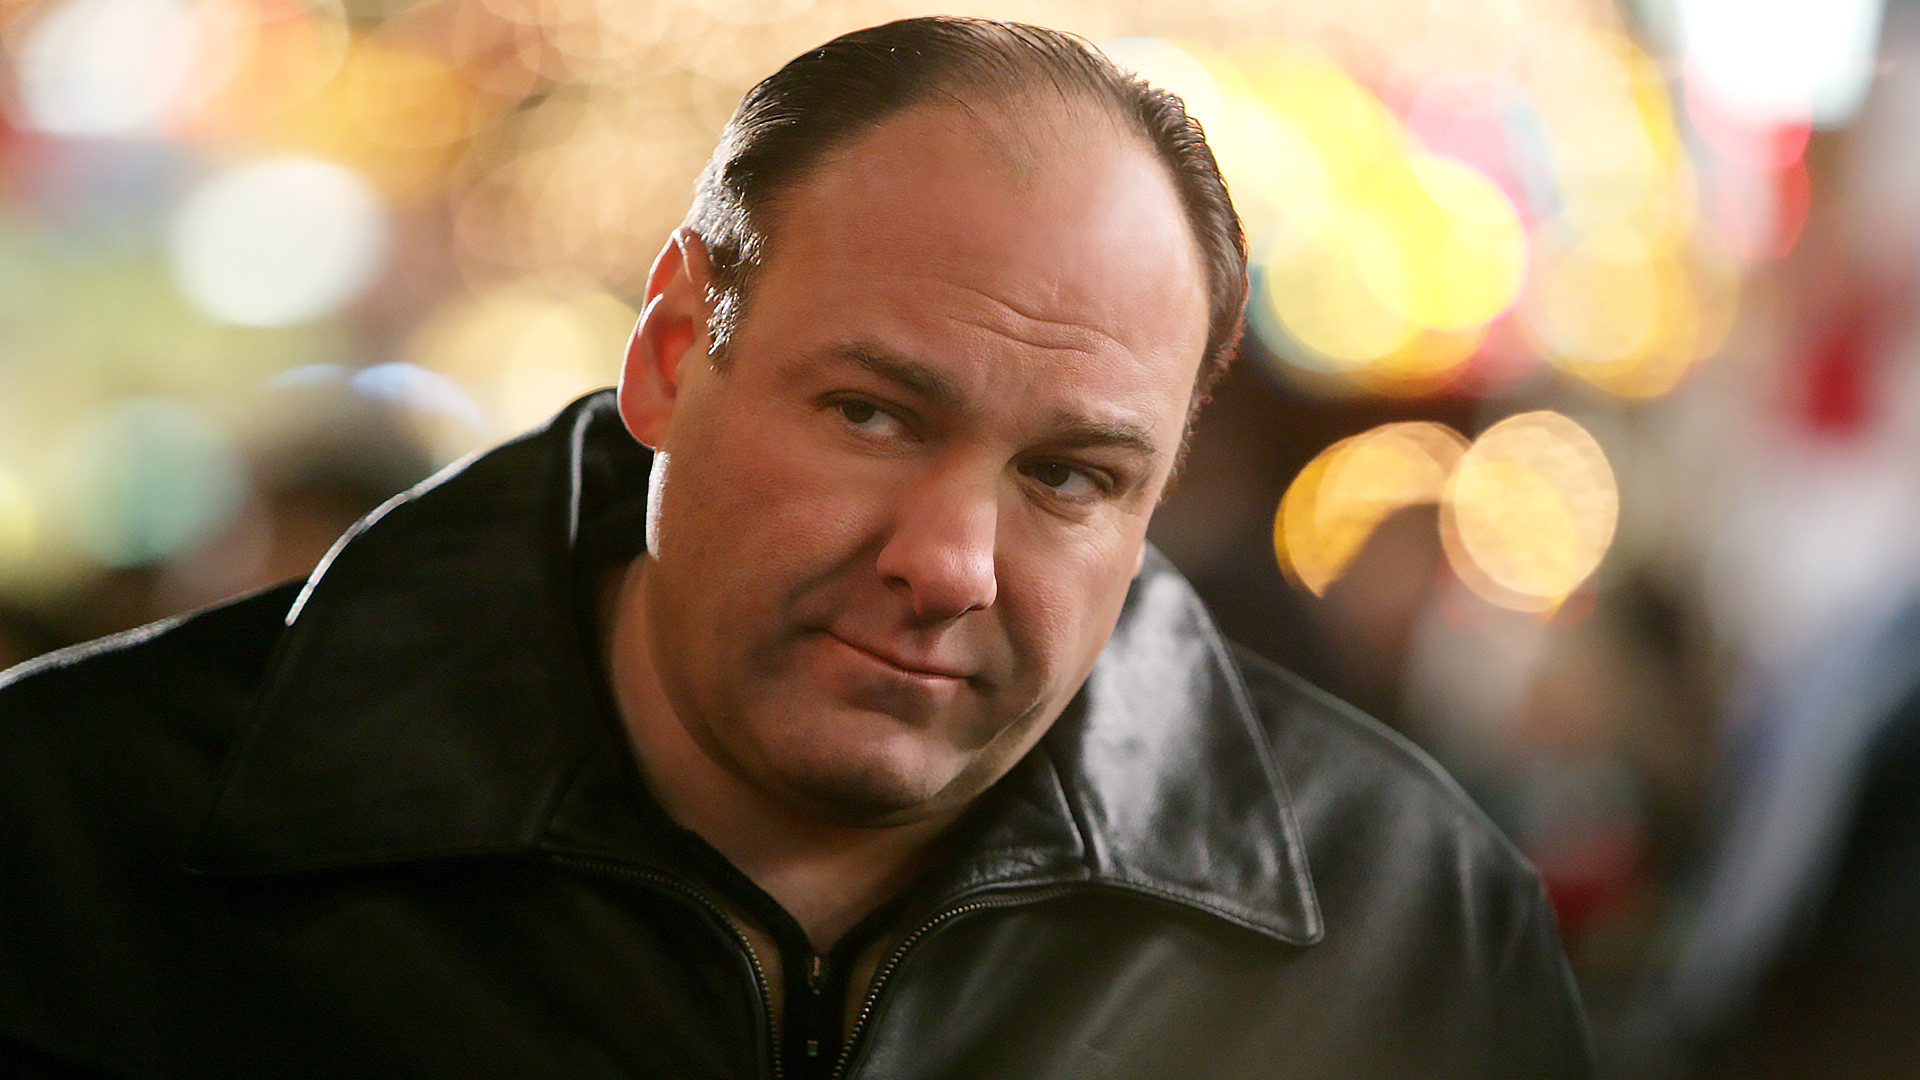 1920x1080 ... Wallpapers 286 best The Sopranos images on Pinterest | The sopranos,  Tony .